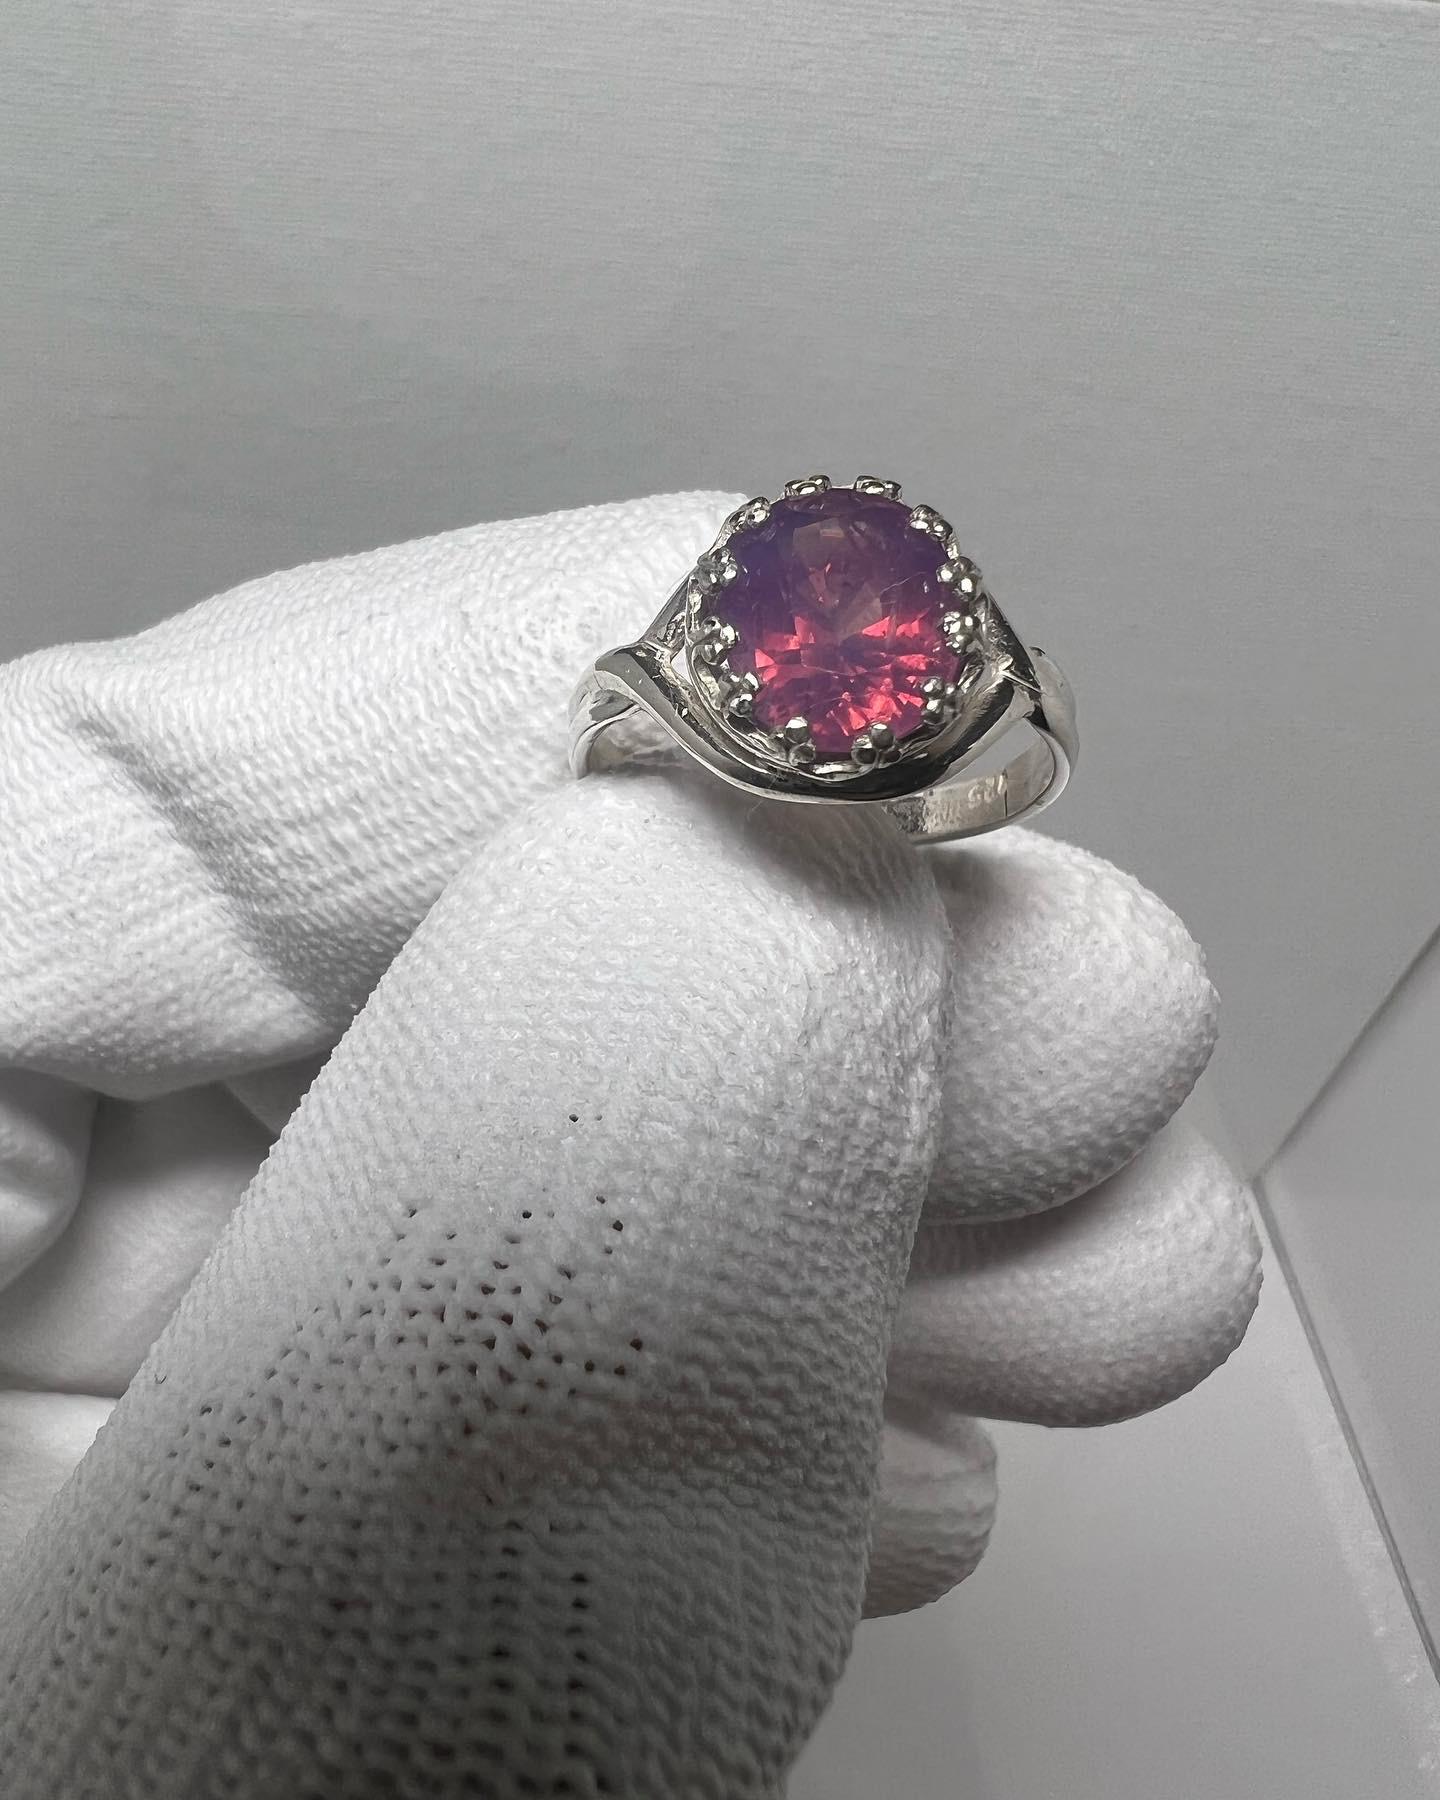 This EyeClean 3.5 Carat Reddish Pink with Blue Hue Kashmir Sapphire comes from the Batakundi Kashmir mine and has a  very beautiful eye catching color. It’s bright and lively and rare to possess in this size , clarity and color . It’s a very clean